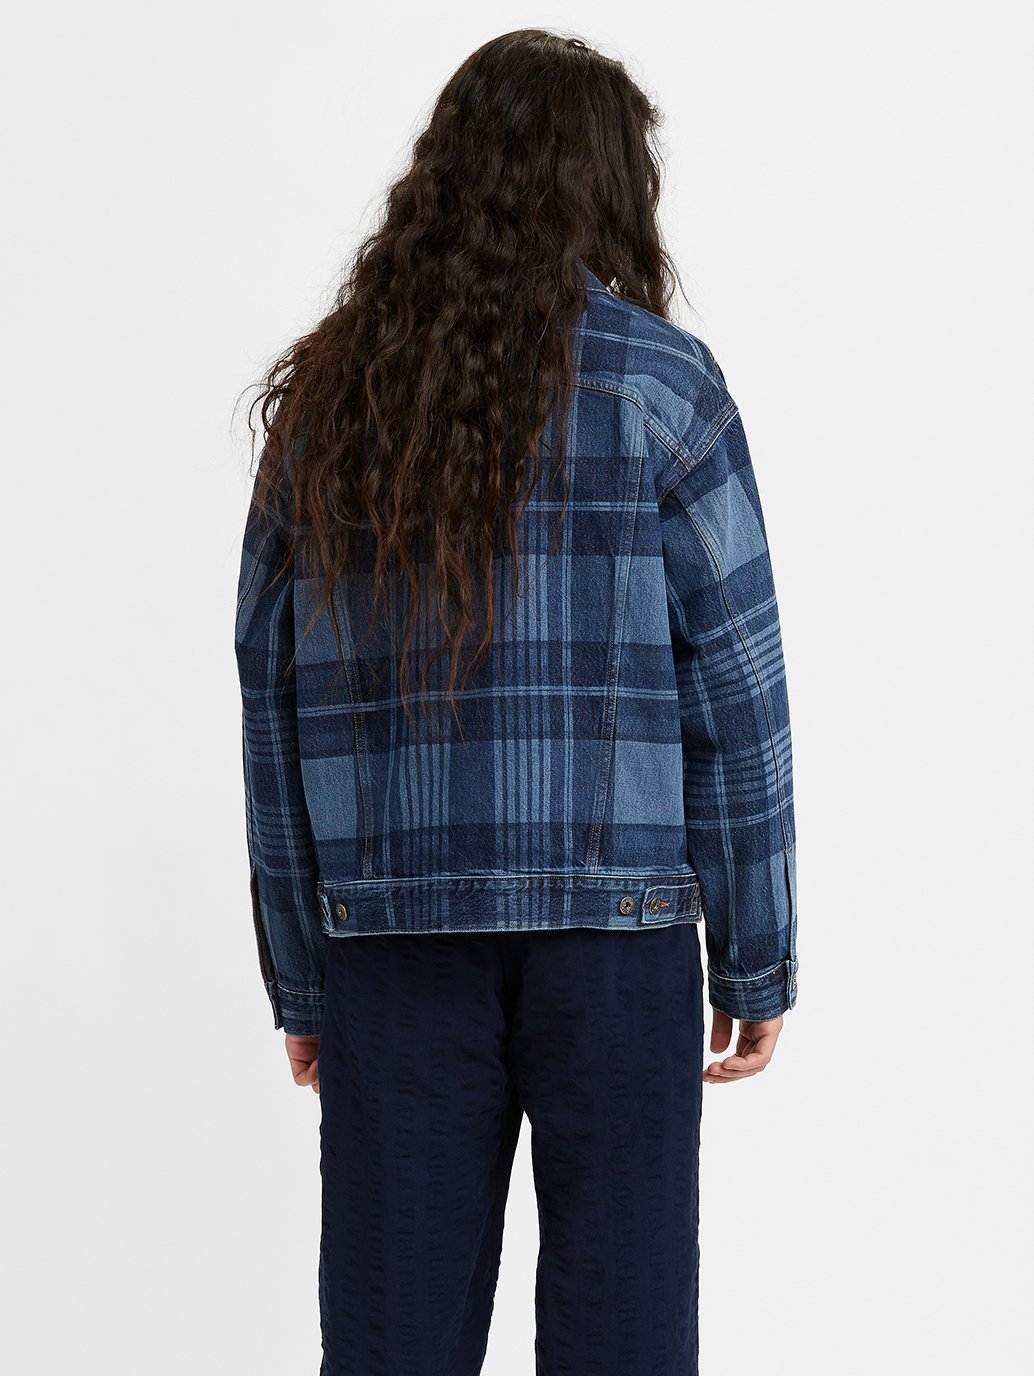 Buy Levi's® Made & Crafted® Men's Oversized Type II Trucker Jacket | Levi's®  Official Online Store M